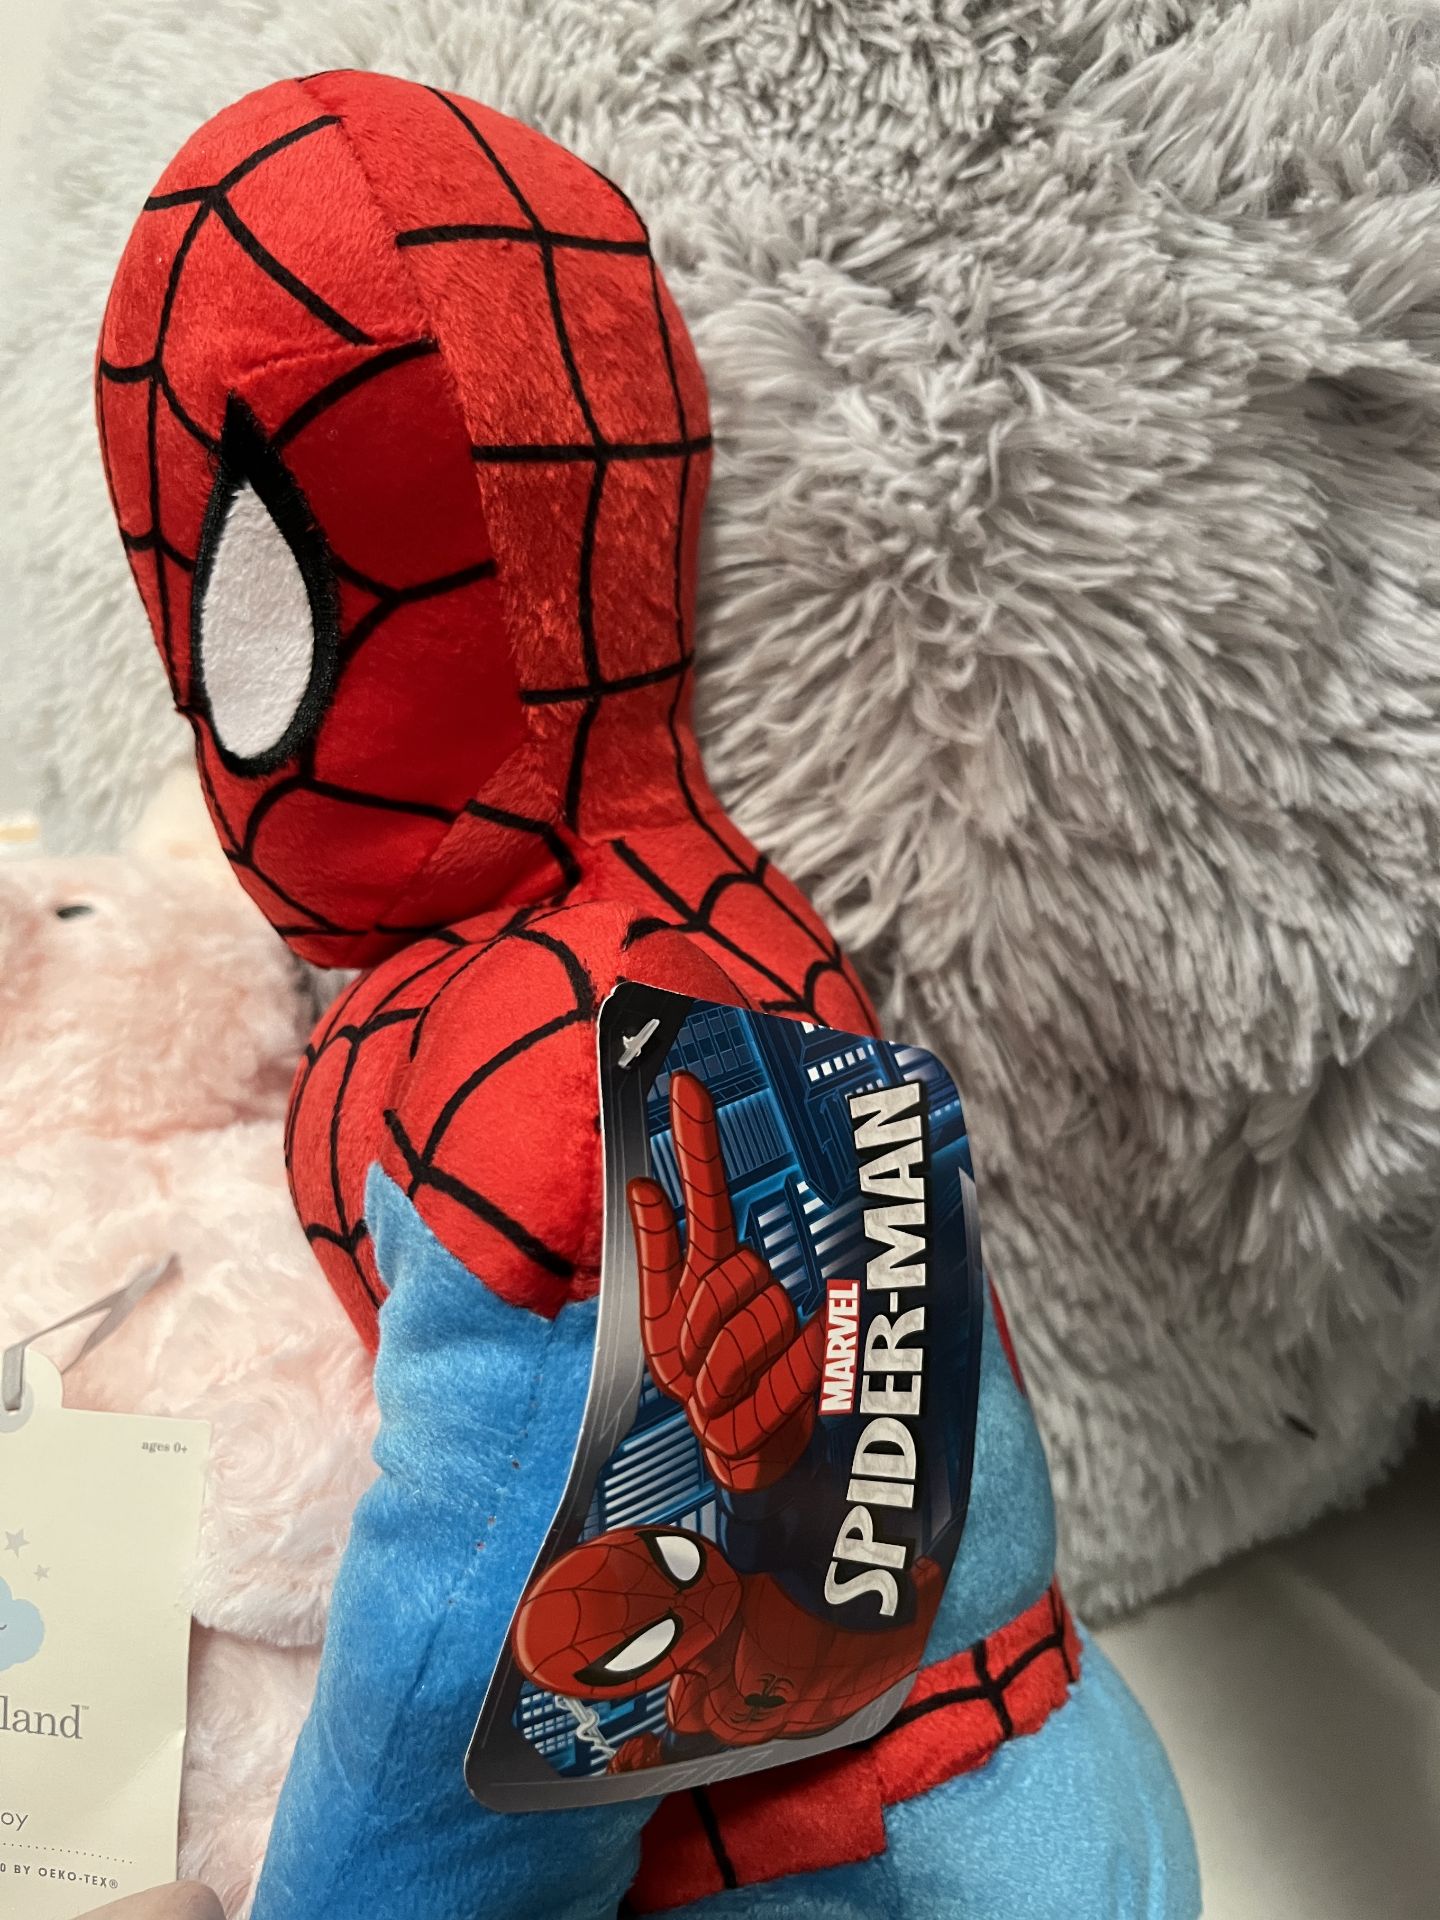 Bedding, fluffy pillow and branded stuck animals, Disney, Marvel, etc. NB3 - Image 3 of 6